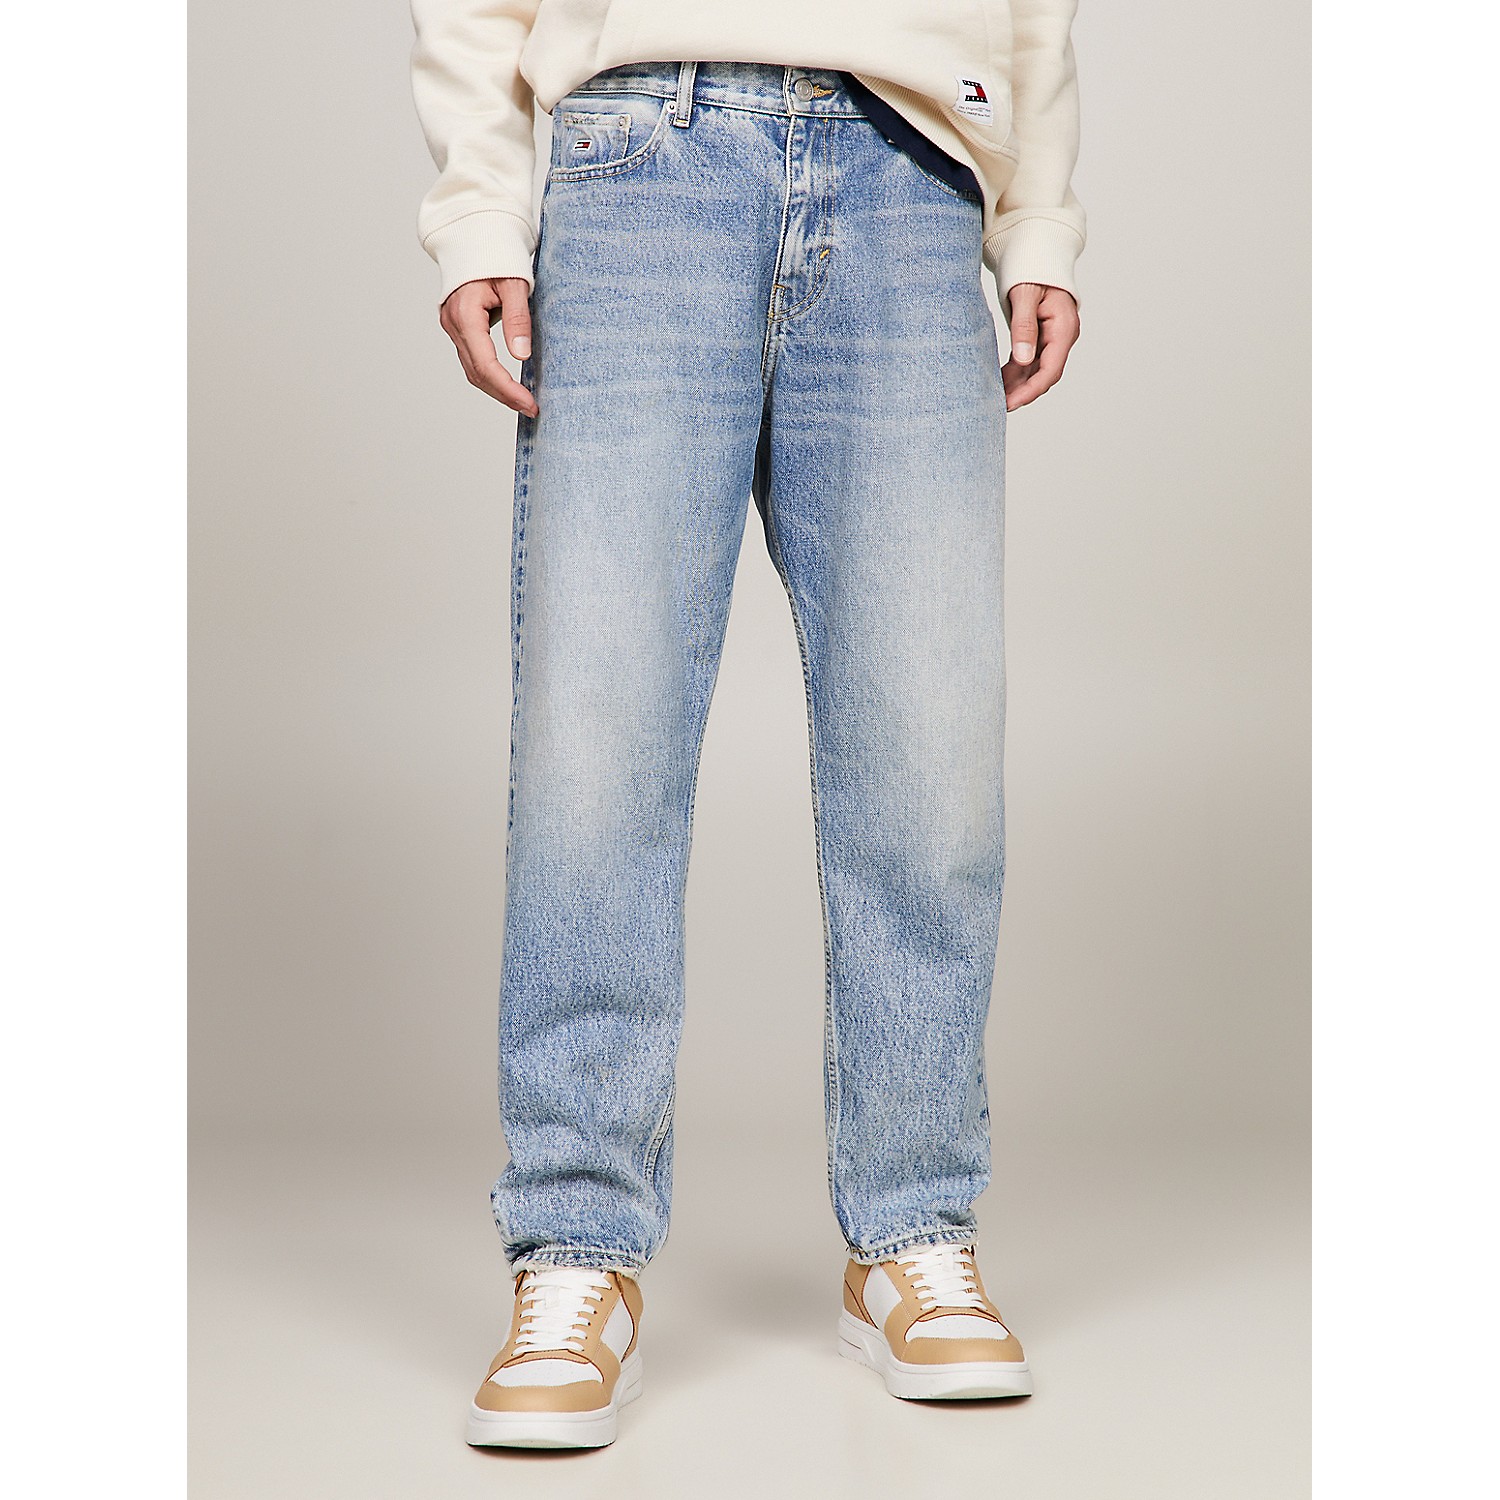 TOMMY HILFIGER Relaxed Tapered Fit Light Wash Jean